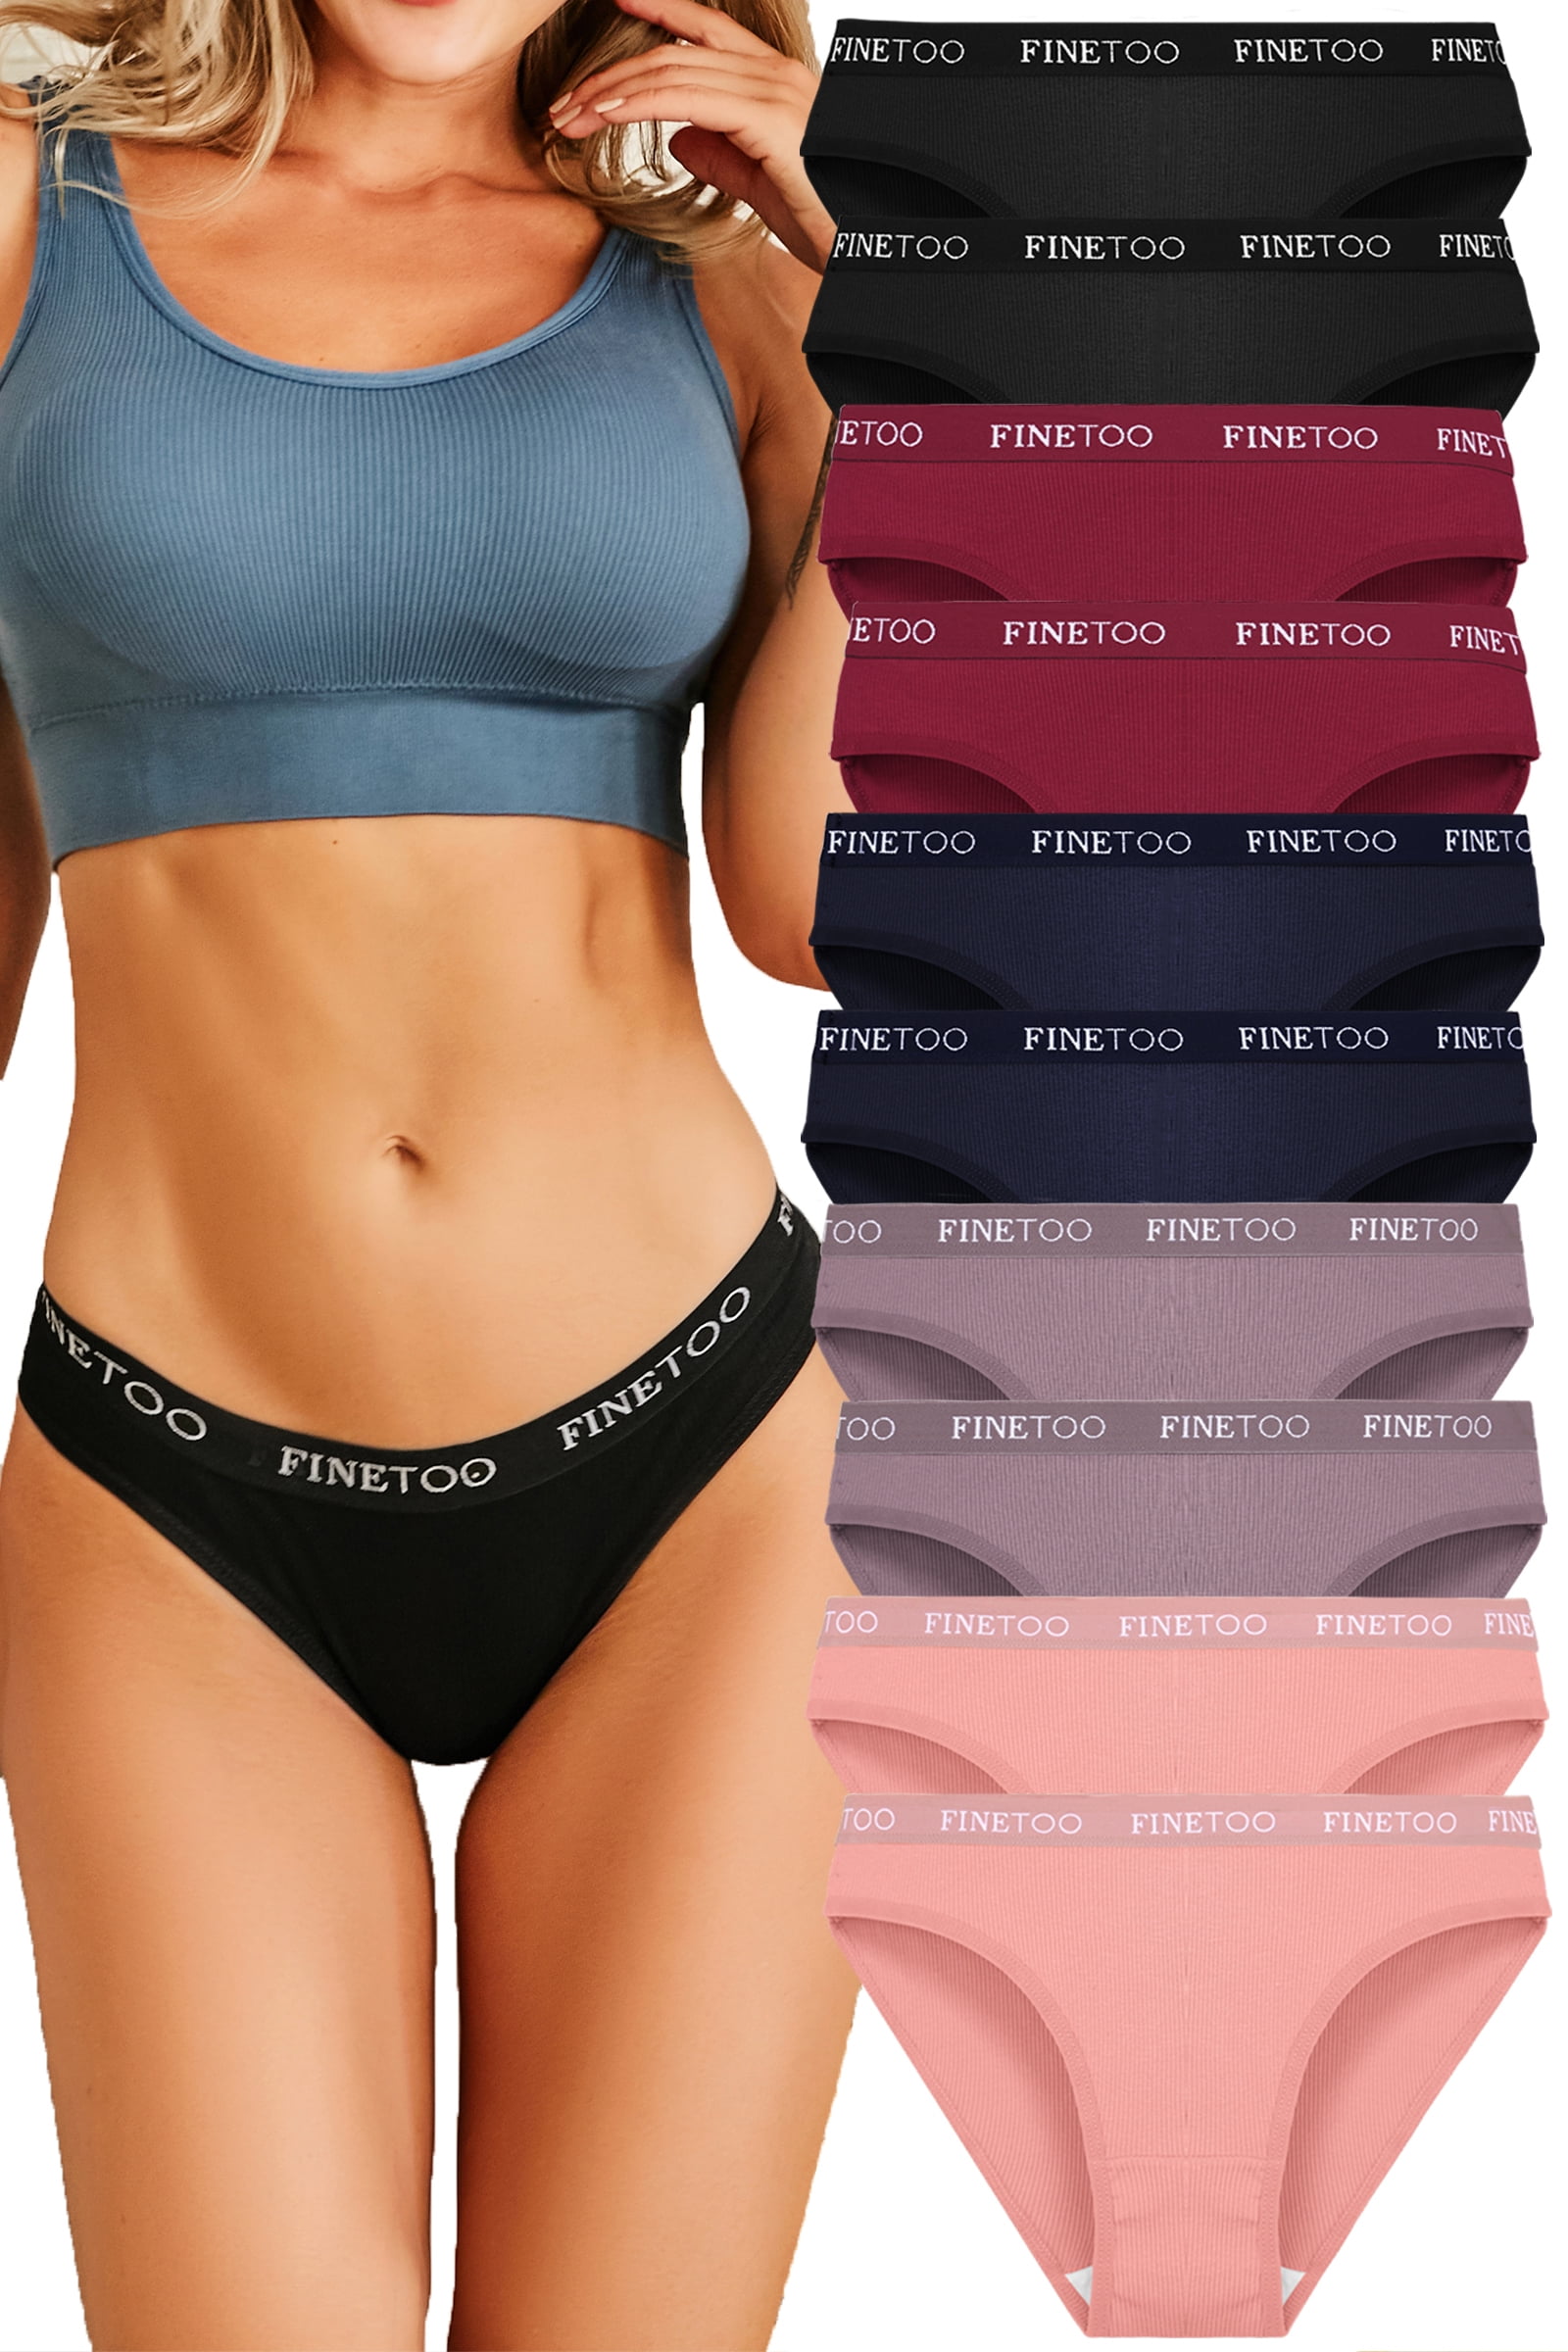 FINETOO 10 Pack Cotton Underwear For Women Cheeky Panties Low Rise Bikini  Hipster Breathable Stretch S-XL